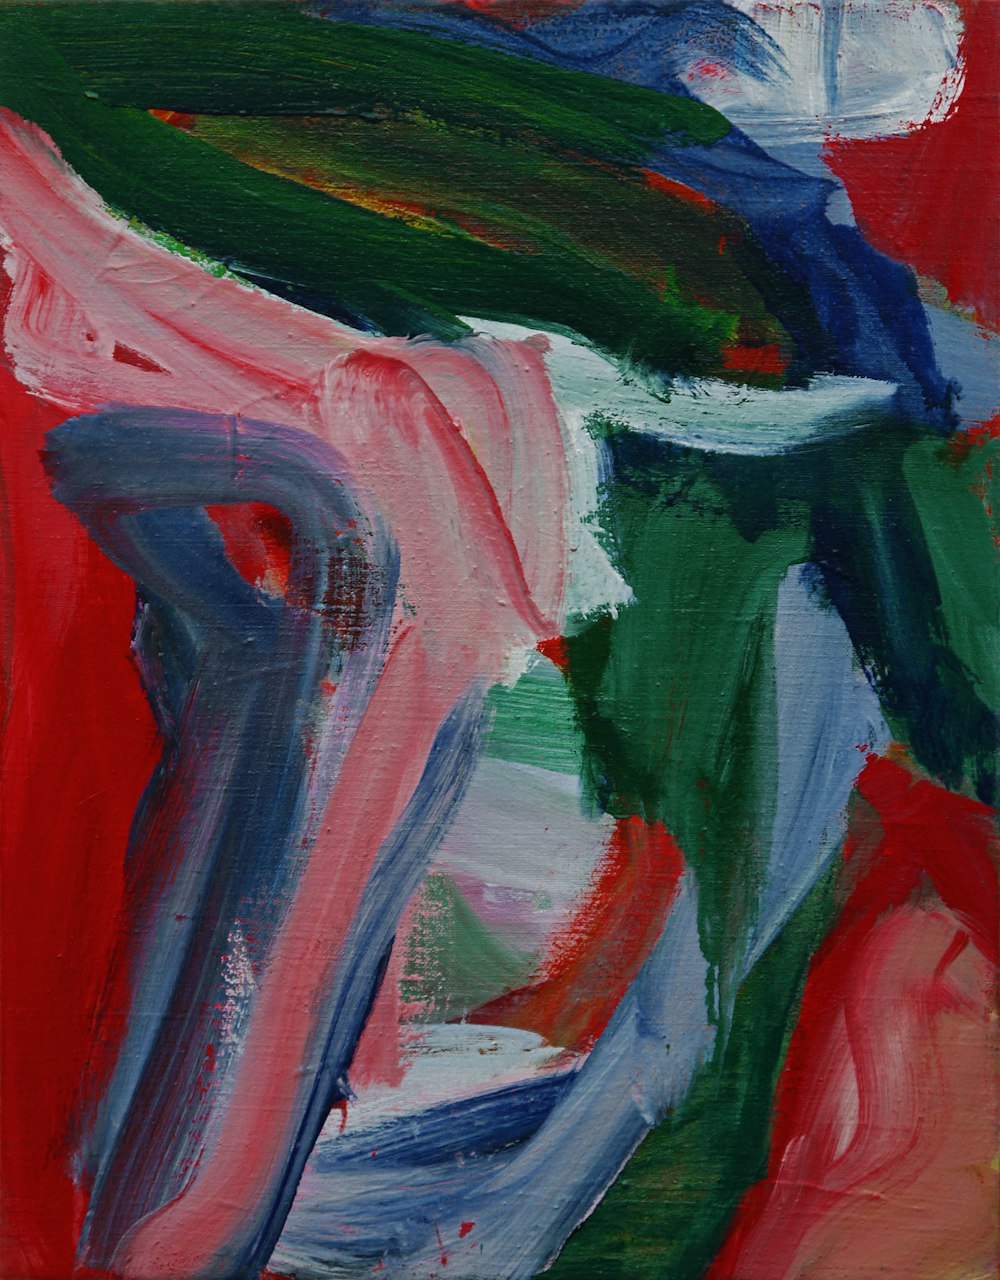 an abstract painting of red, green, blue, and white